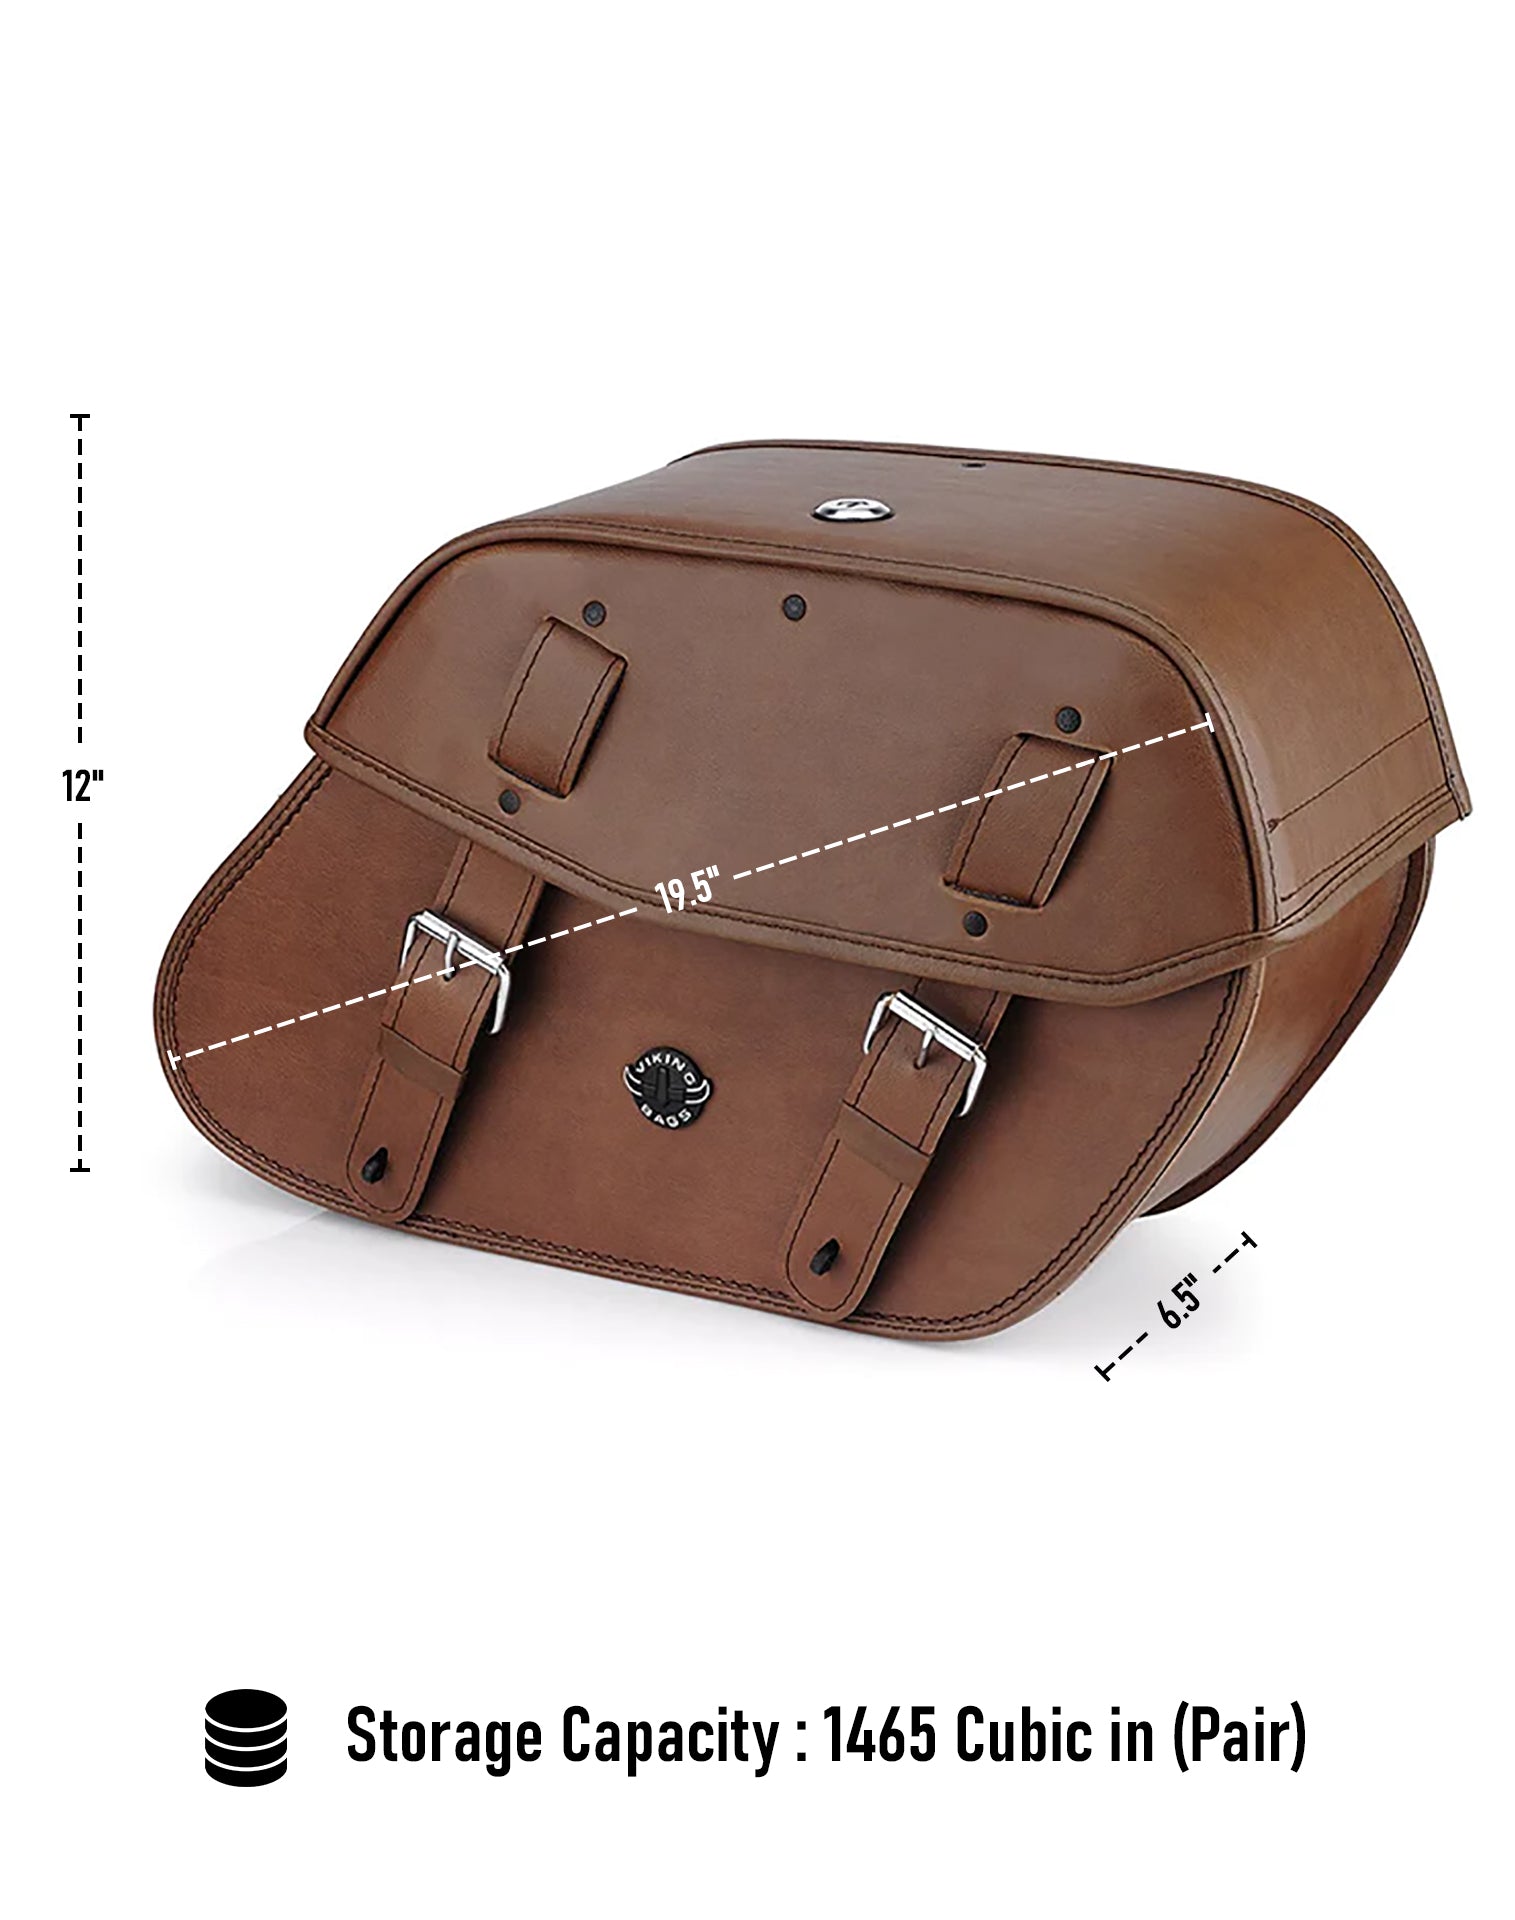 Viking Odin Brown Large Honda Vtx 1300 T Tourer Leather Motorcycle Saddlebags Can Store Your Ridings Gears